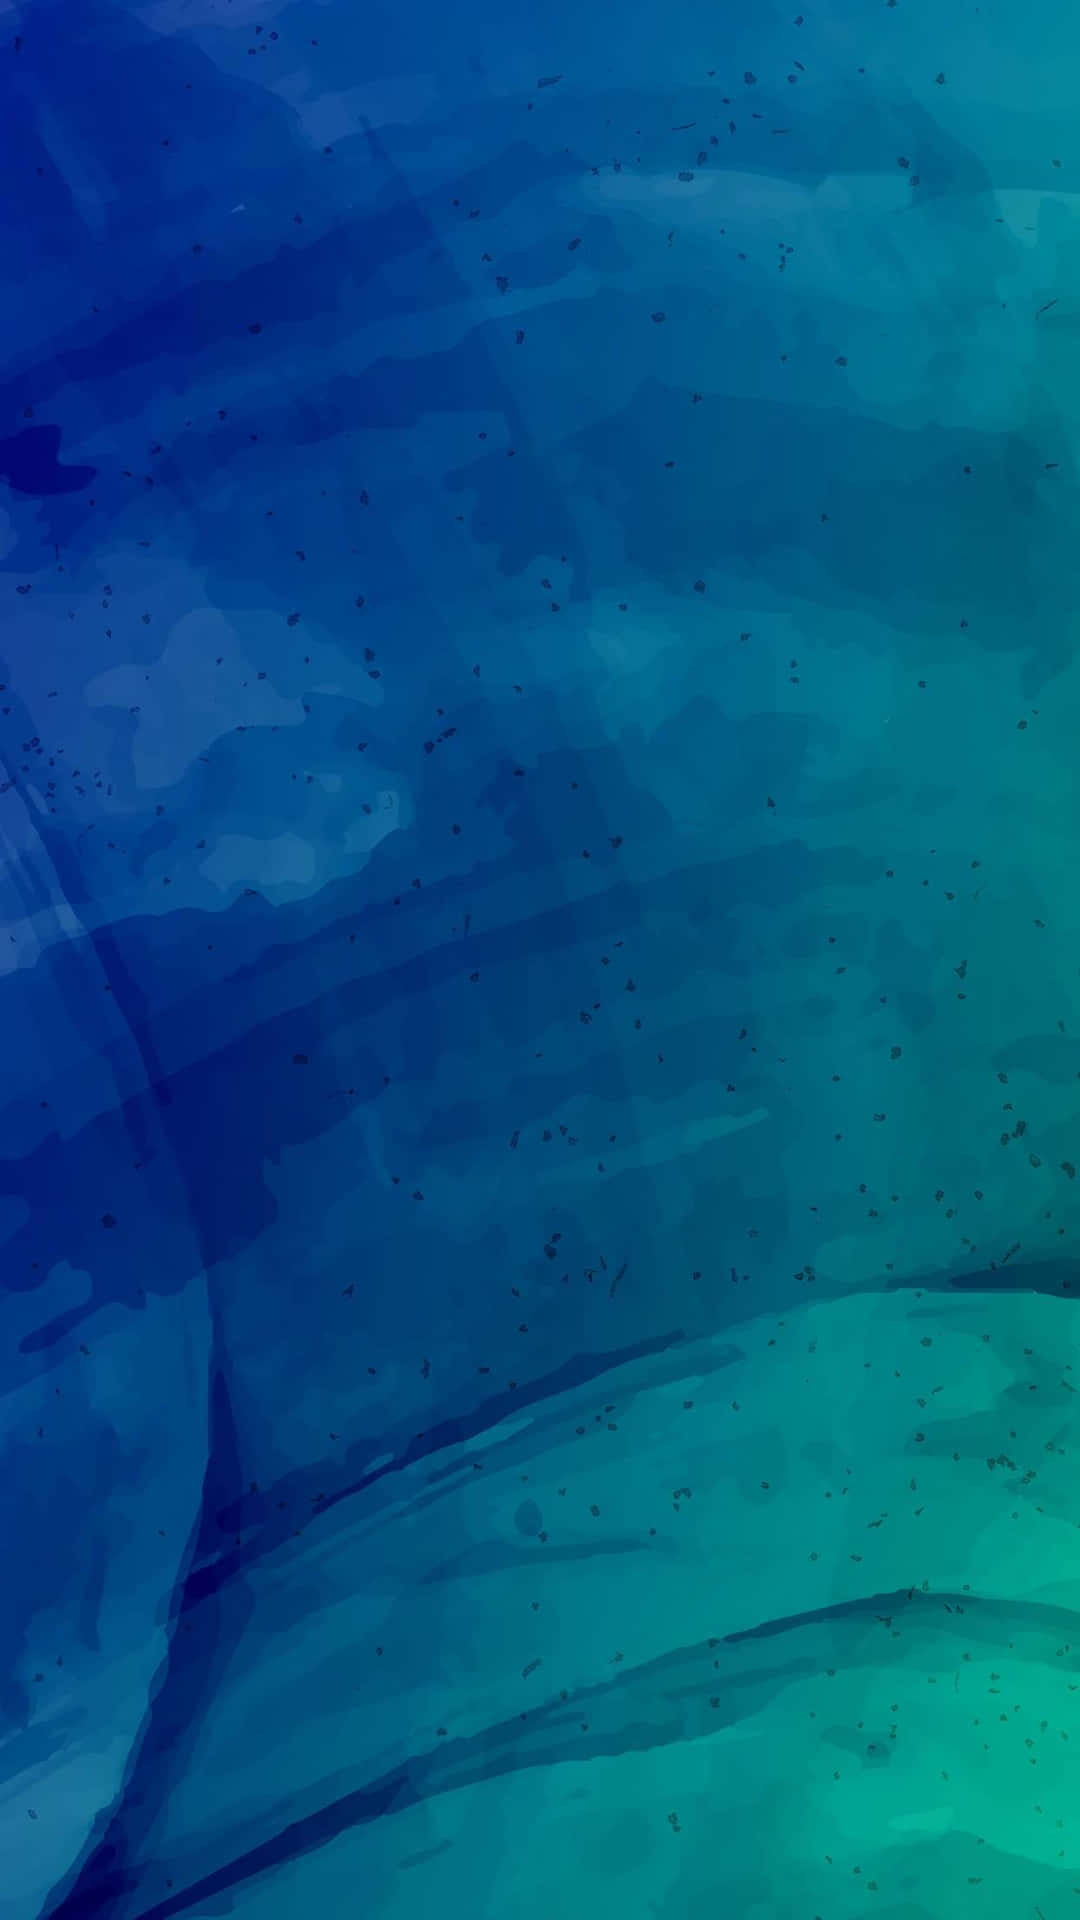 Iphone X Abstract Blue Watercolor Wallpaper